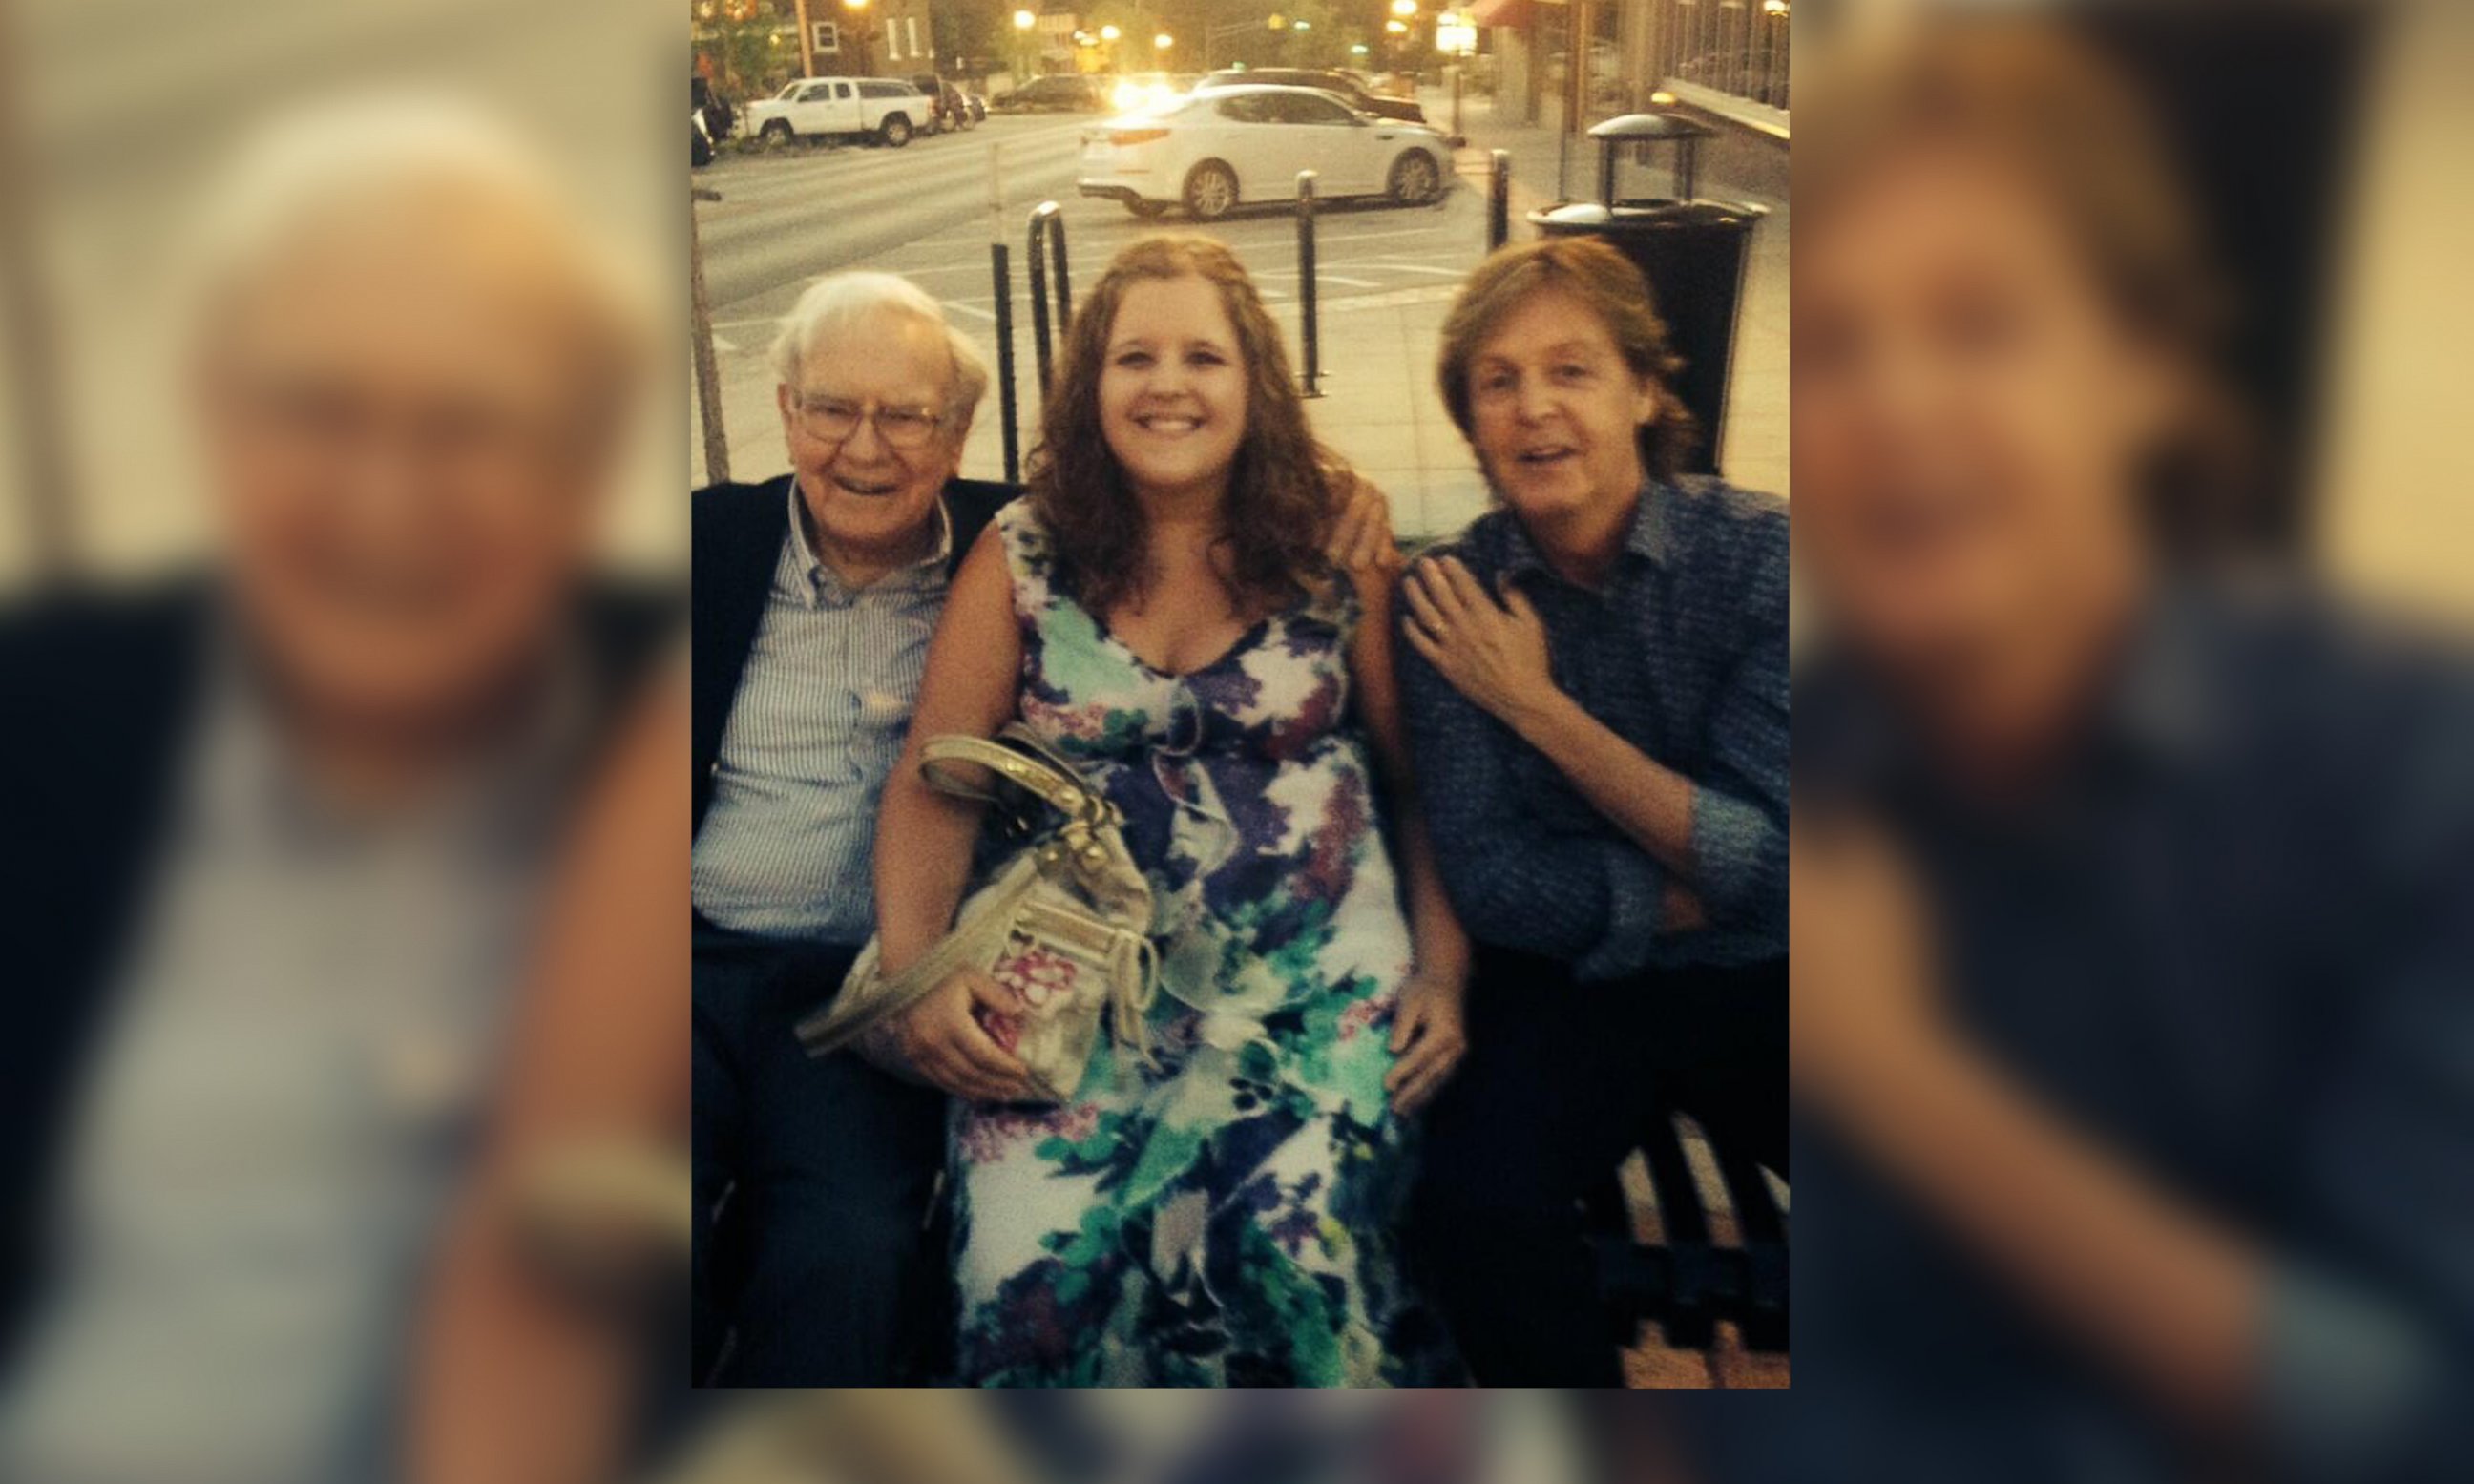 PHOTO: Katy Clarke of Nebraska posted this image of herself with Warren Buffett and Sir Paul McCartney to her Twitter account on July 13, 2014.